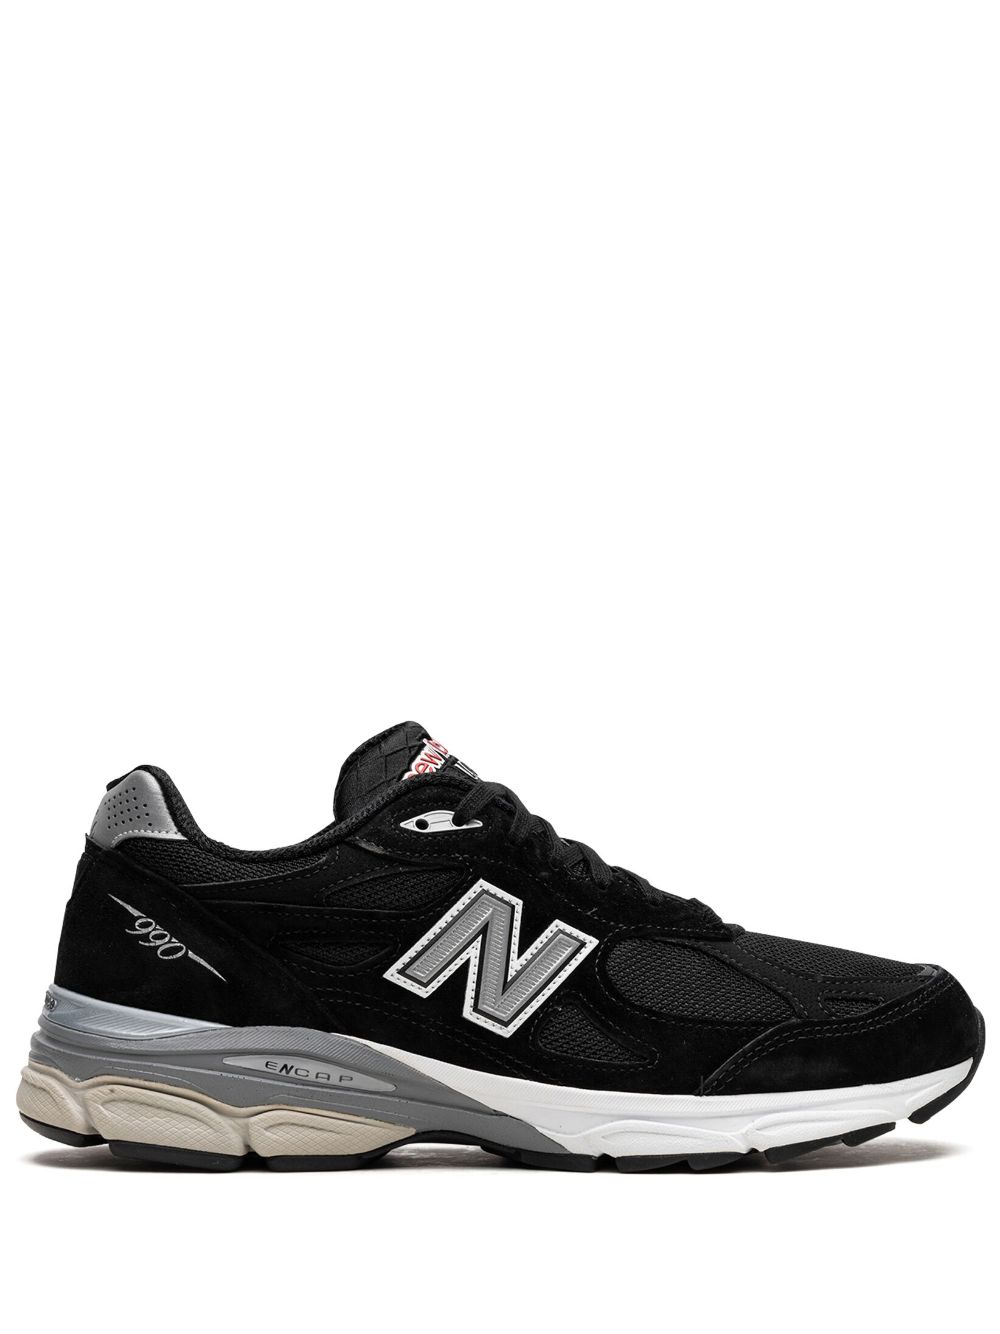 New Balance 990v3 low-top sneakers - Black